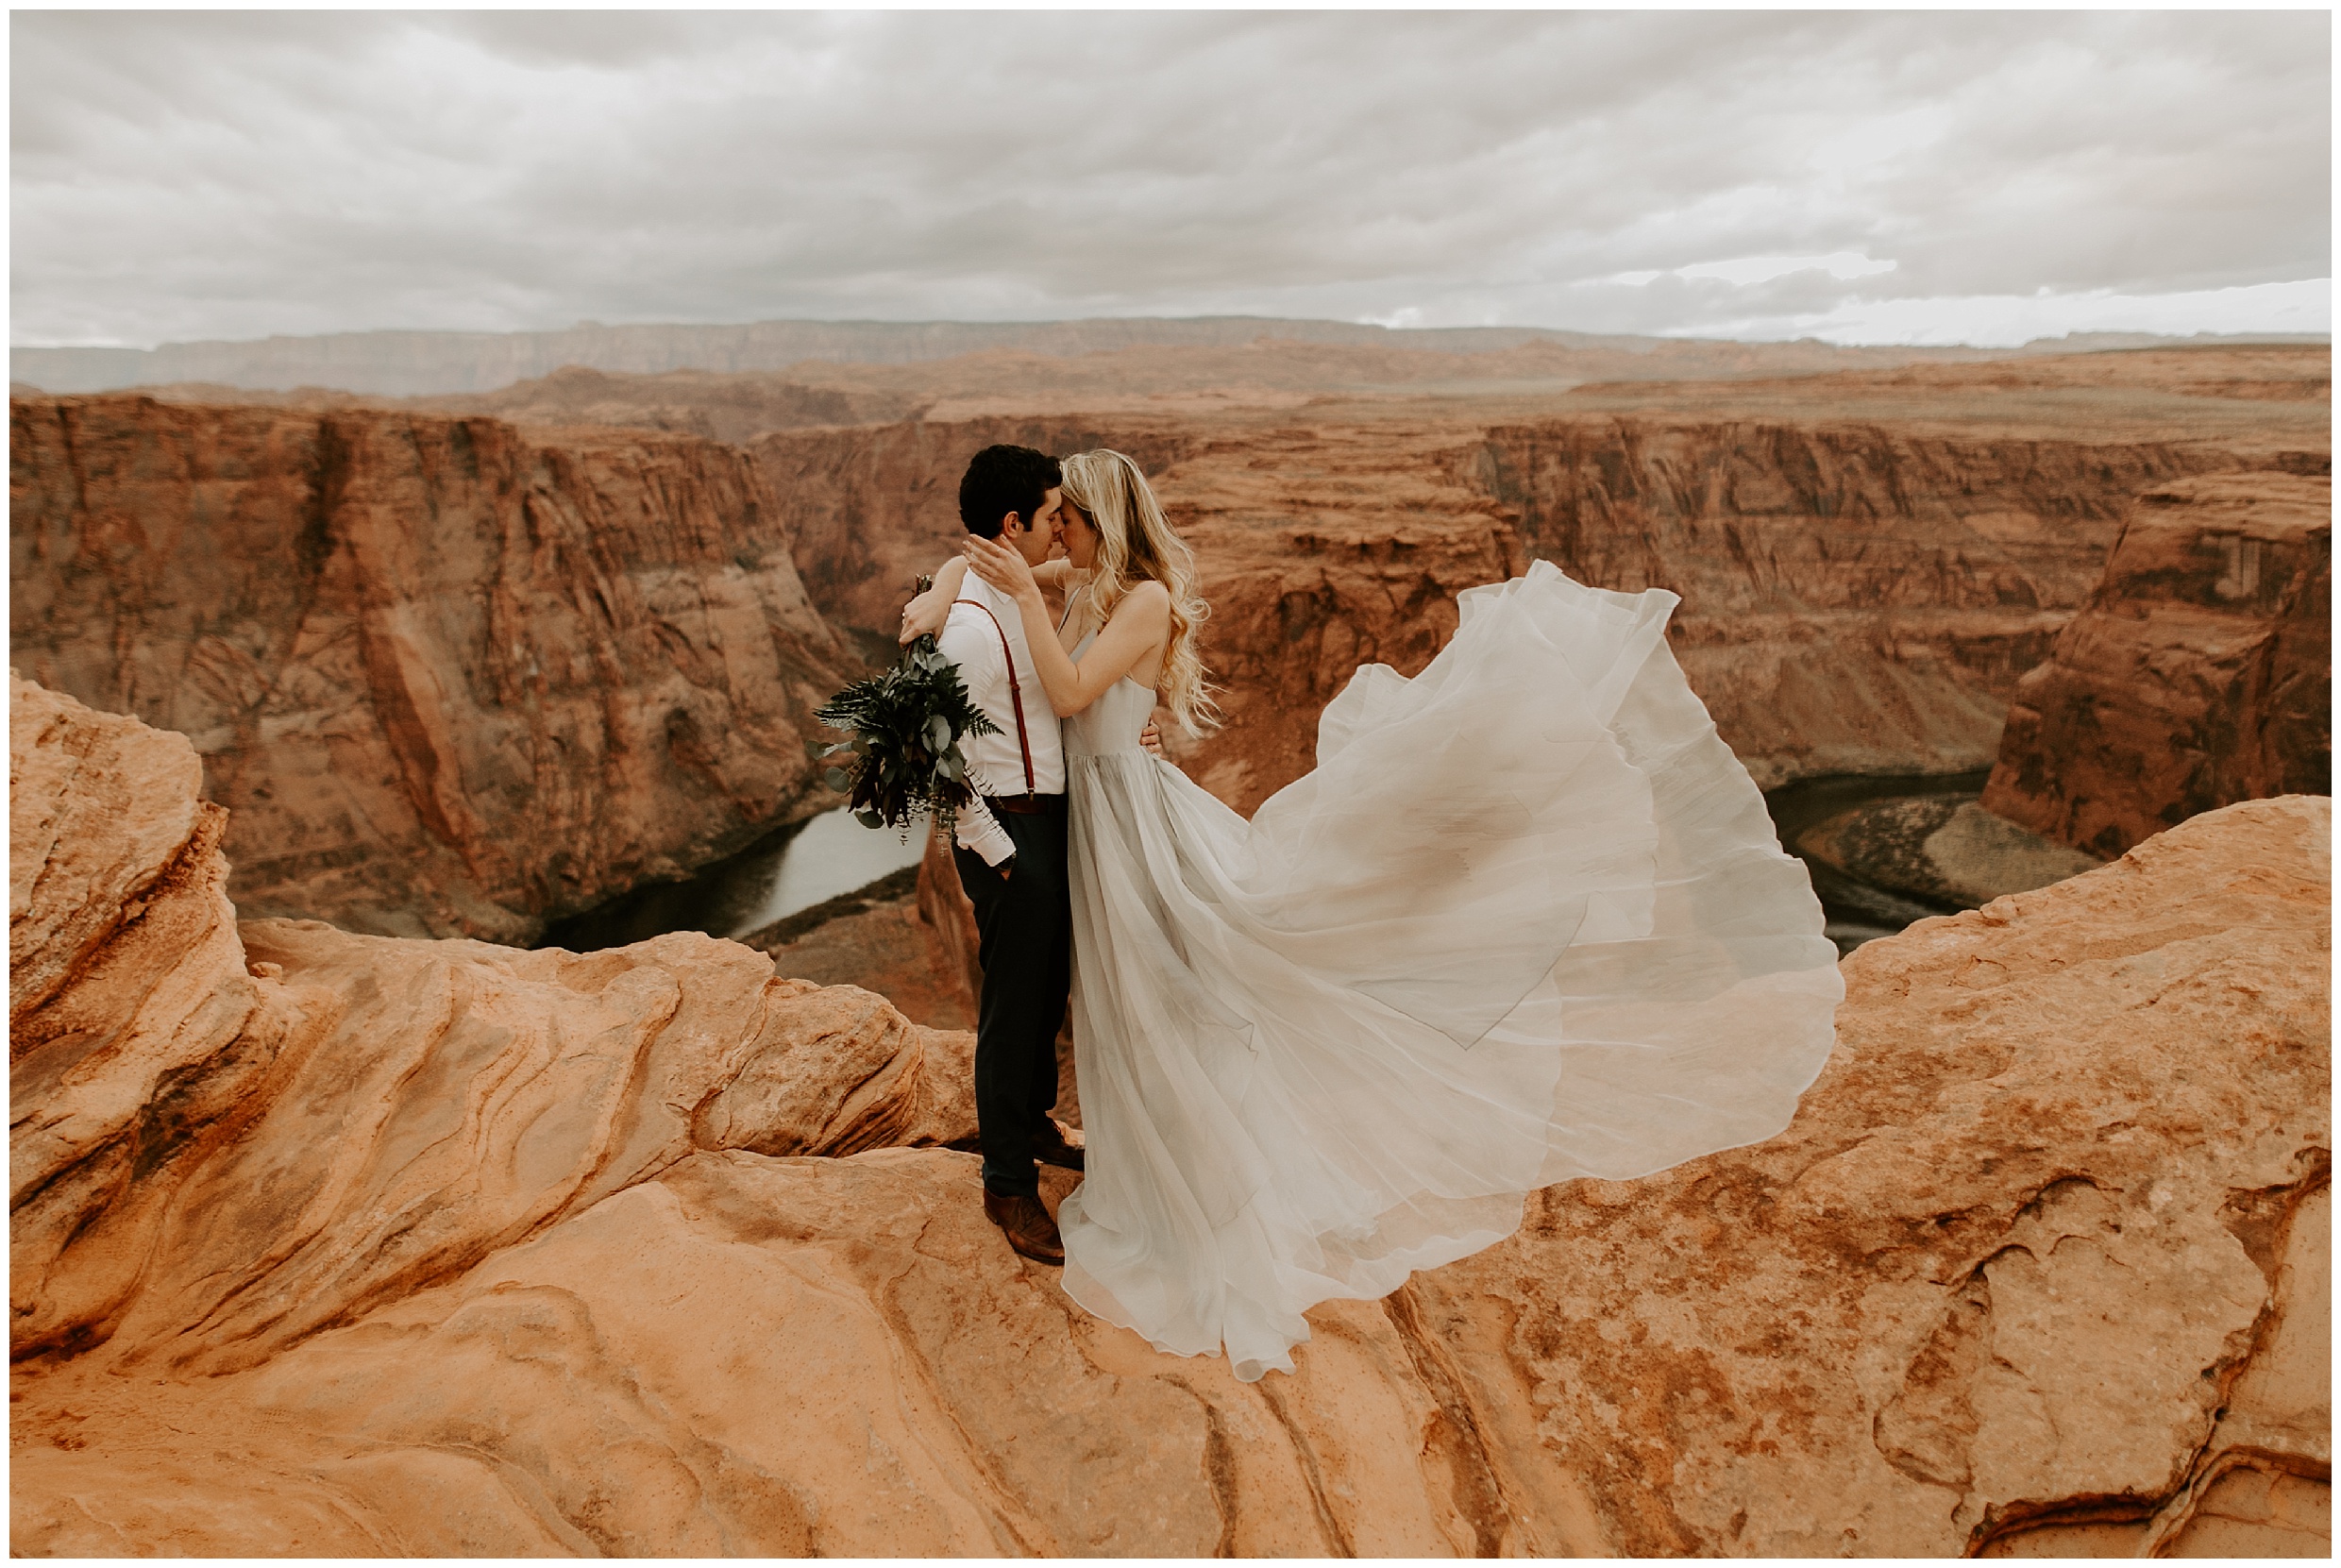 A bride and groom photo at their Horseshoe Bend wedding